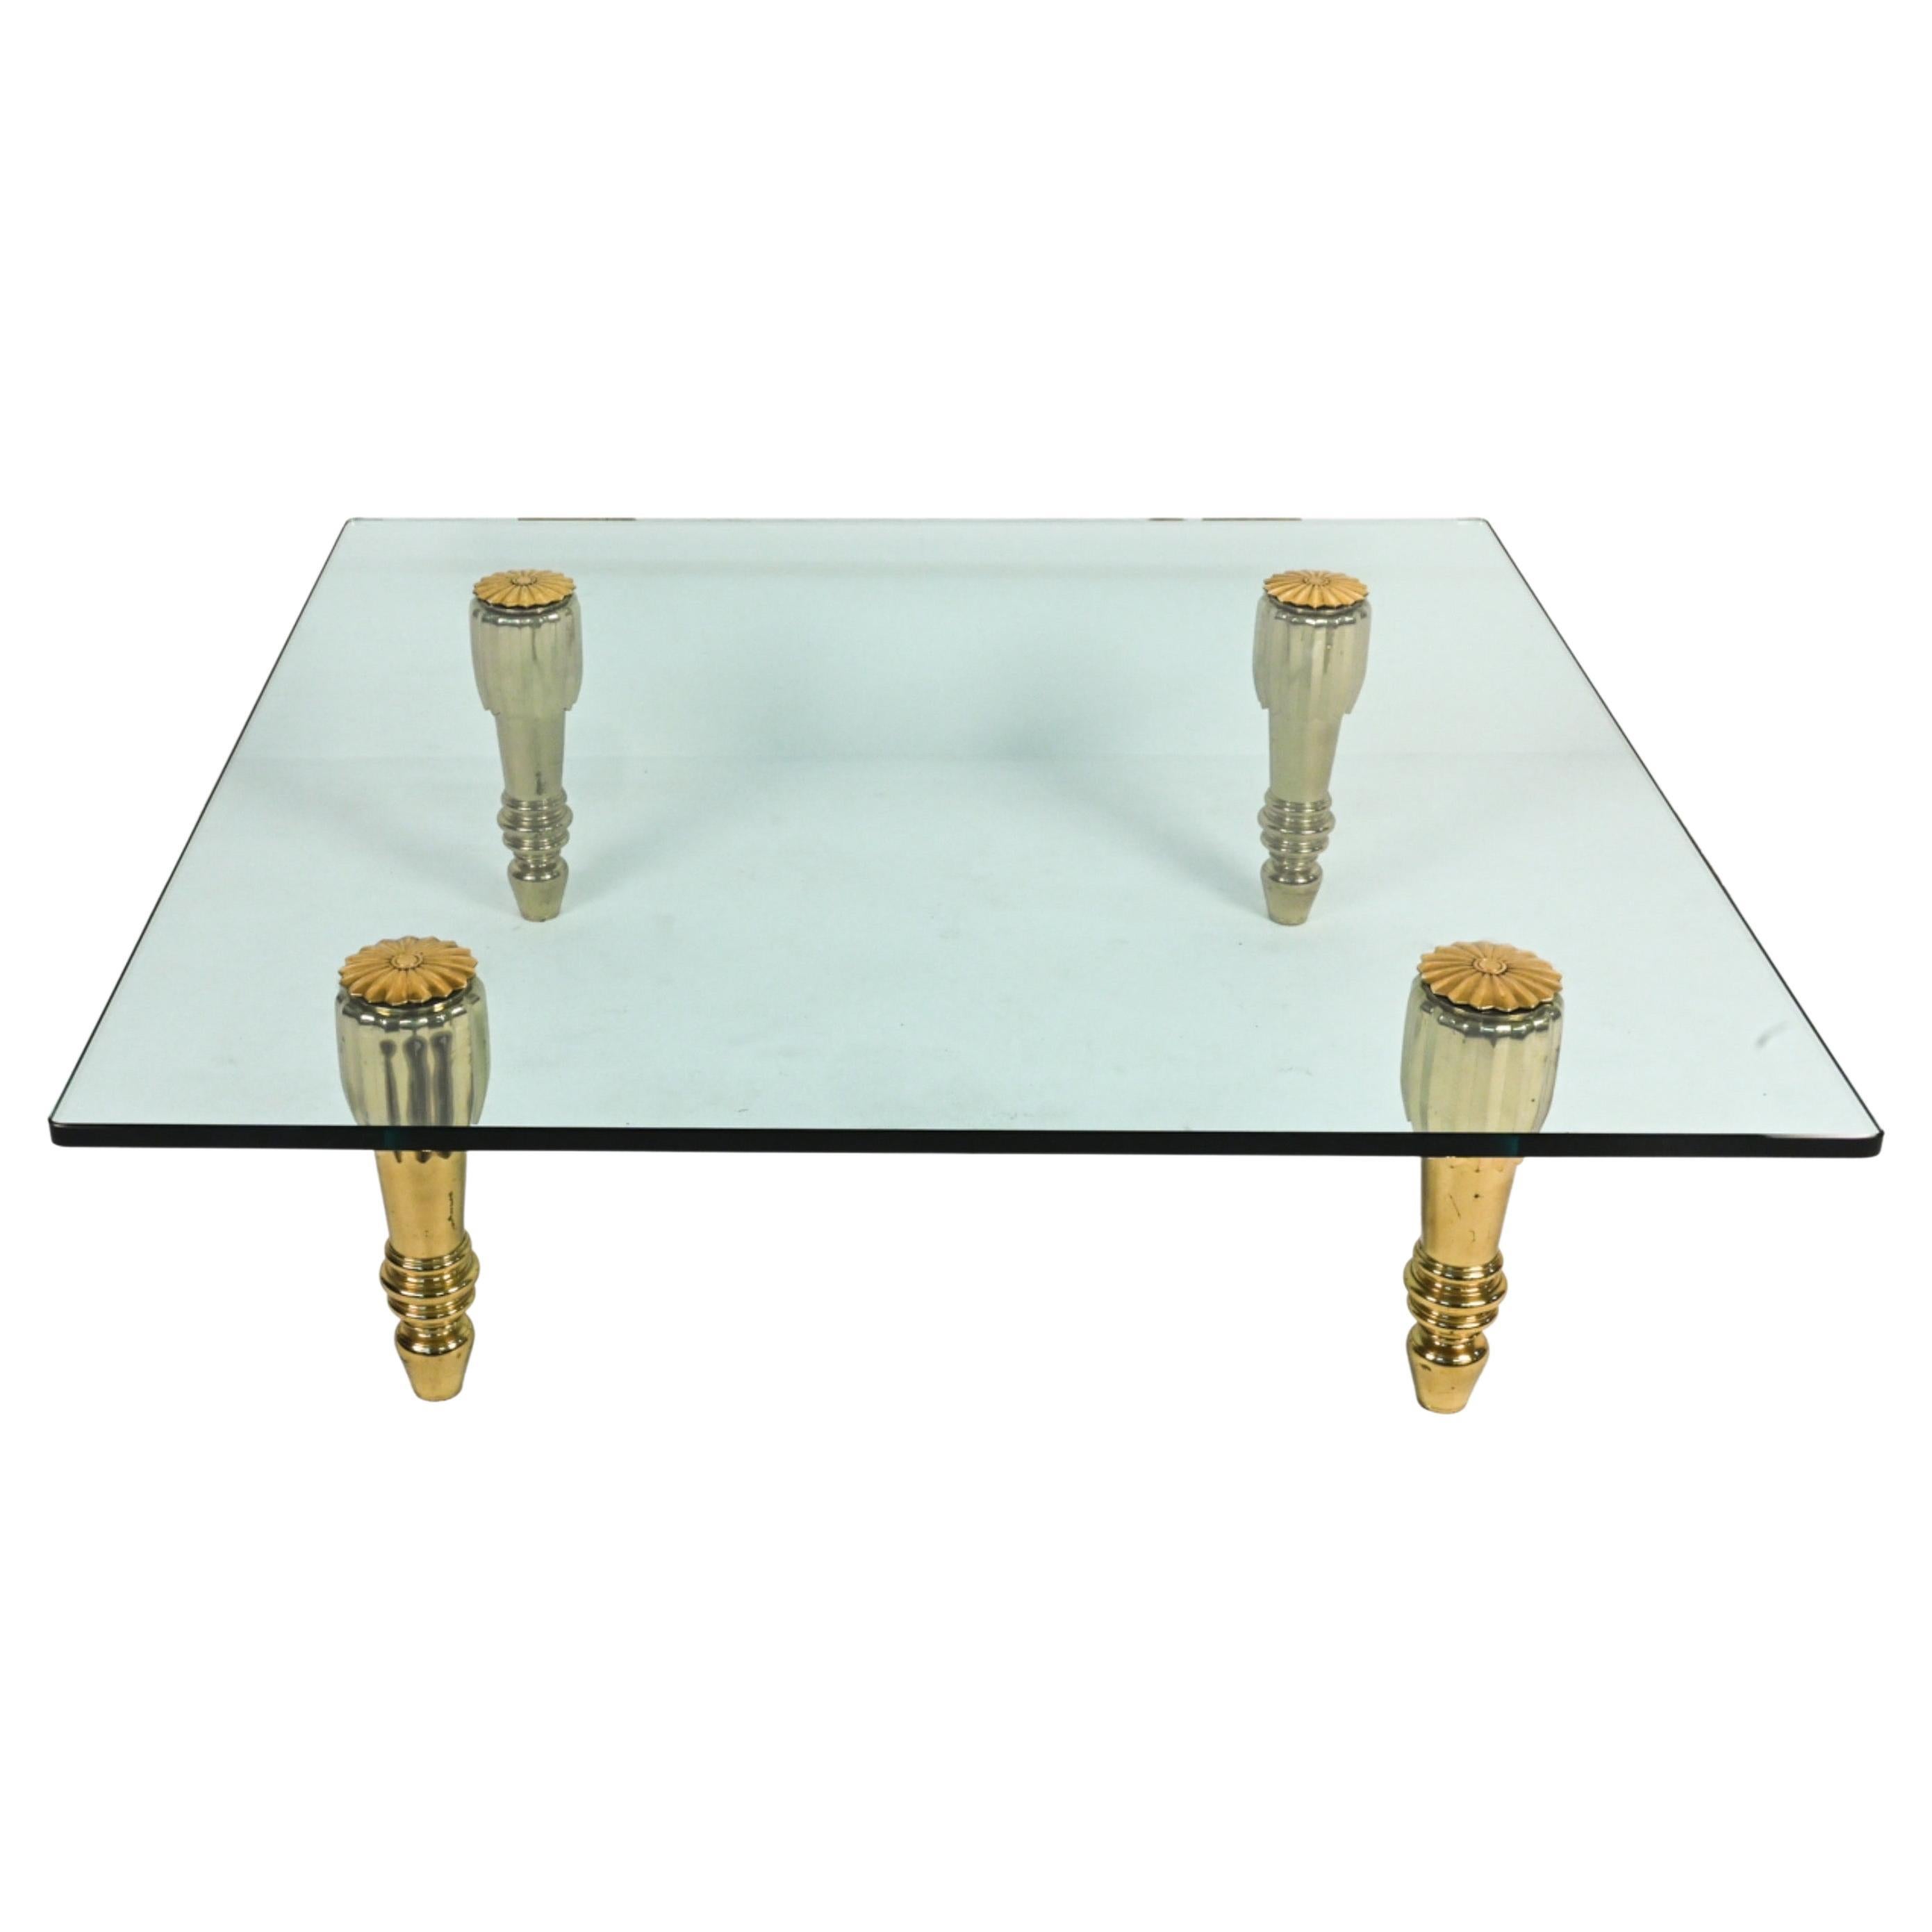  Large Square Hollywood Regency Style Glass Coffee Table with Brass Legs  For Sale